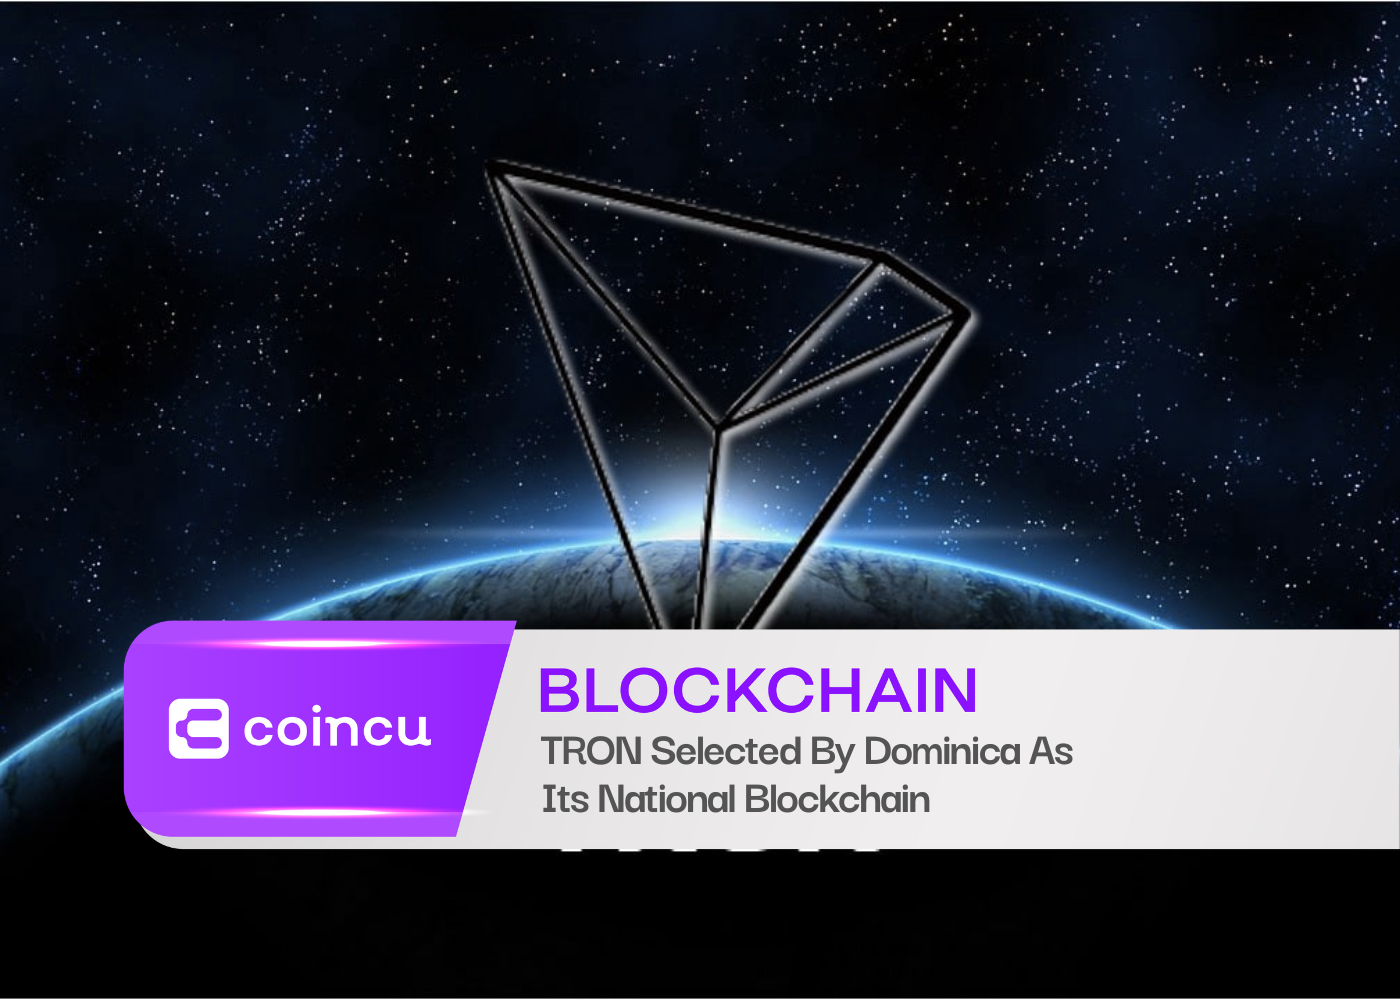 TRON Selected By Dominica As Its National Blockchain